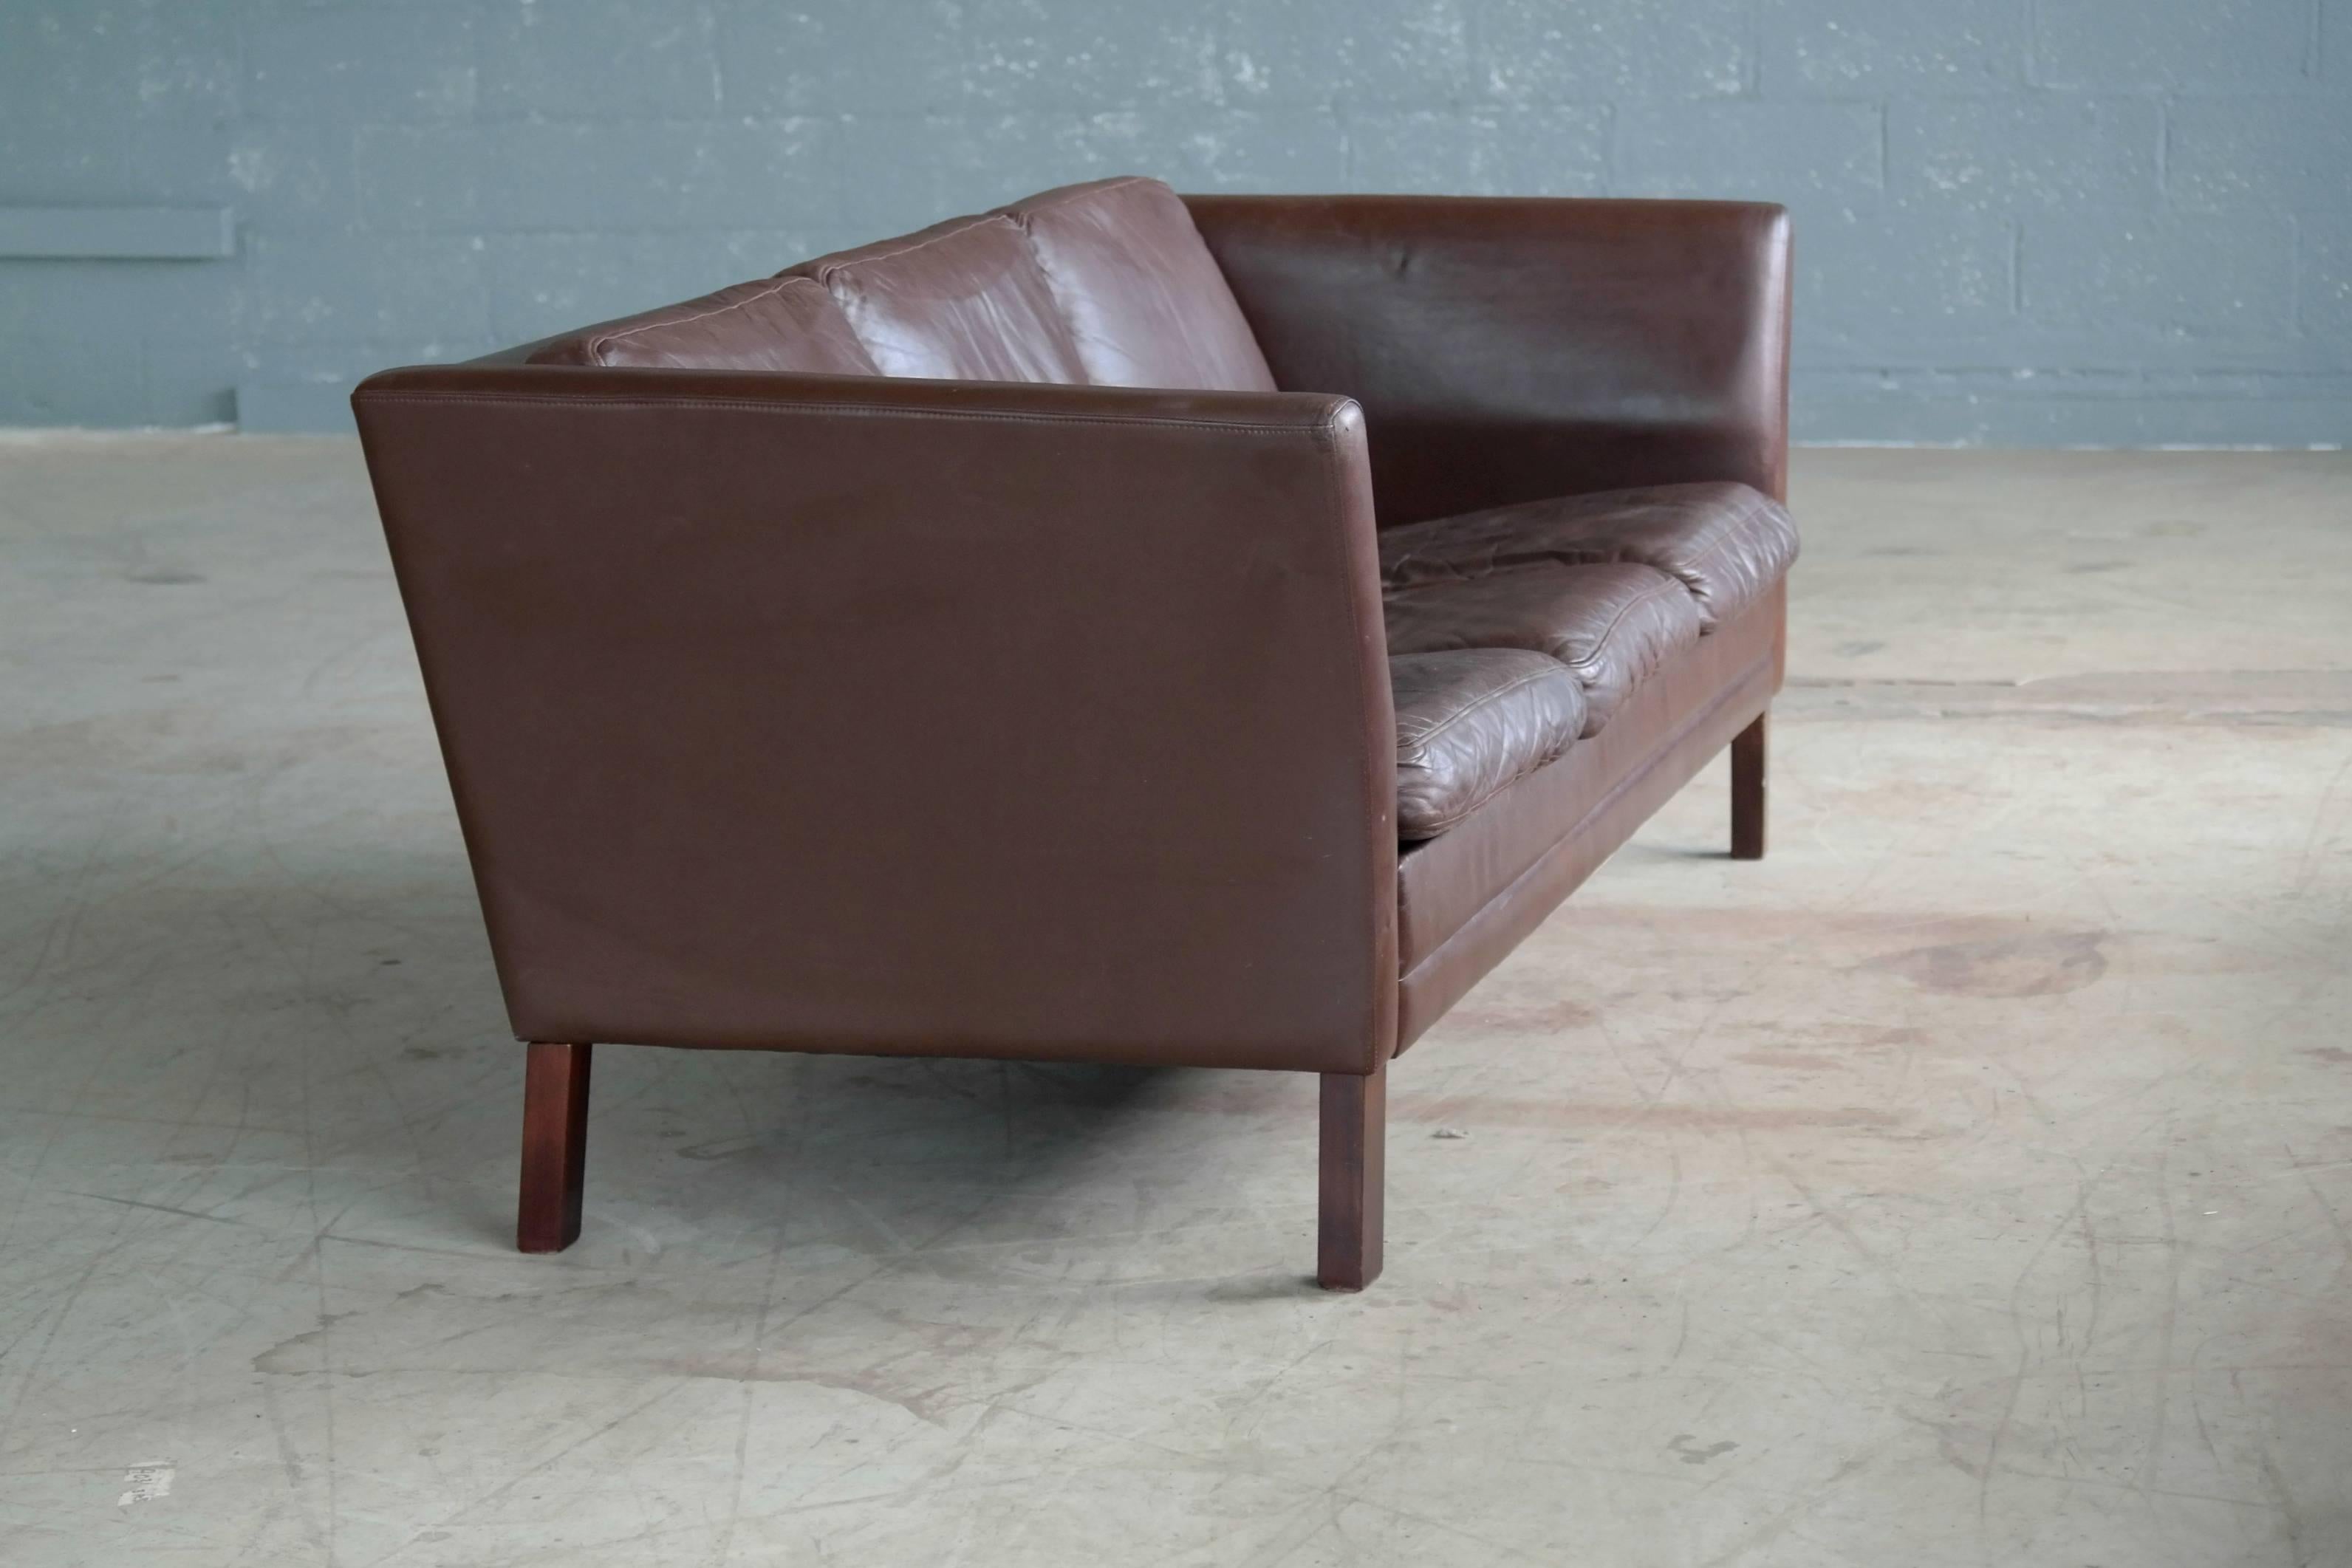 Late 20th Century Borge Mogensen Style Three-Seat Sofa in Chocolate Leather by Mogens Hansen